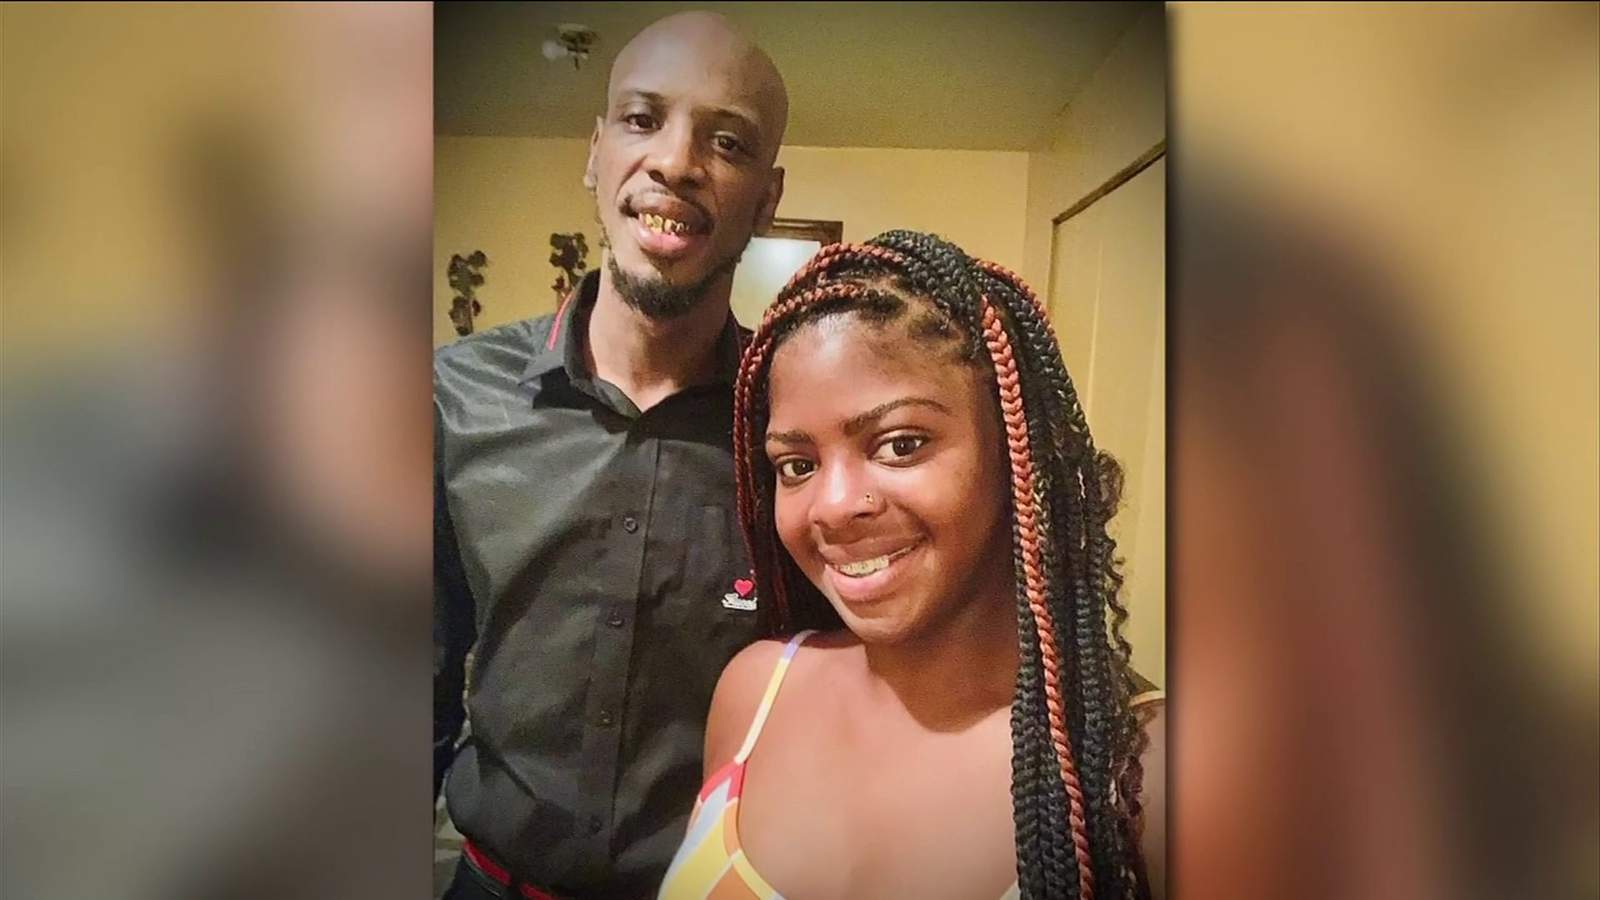 Kamiyah Mobley’s father says he’s ready to meet daughter’s kidnapper